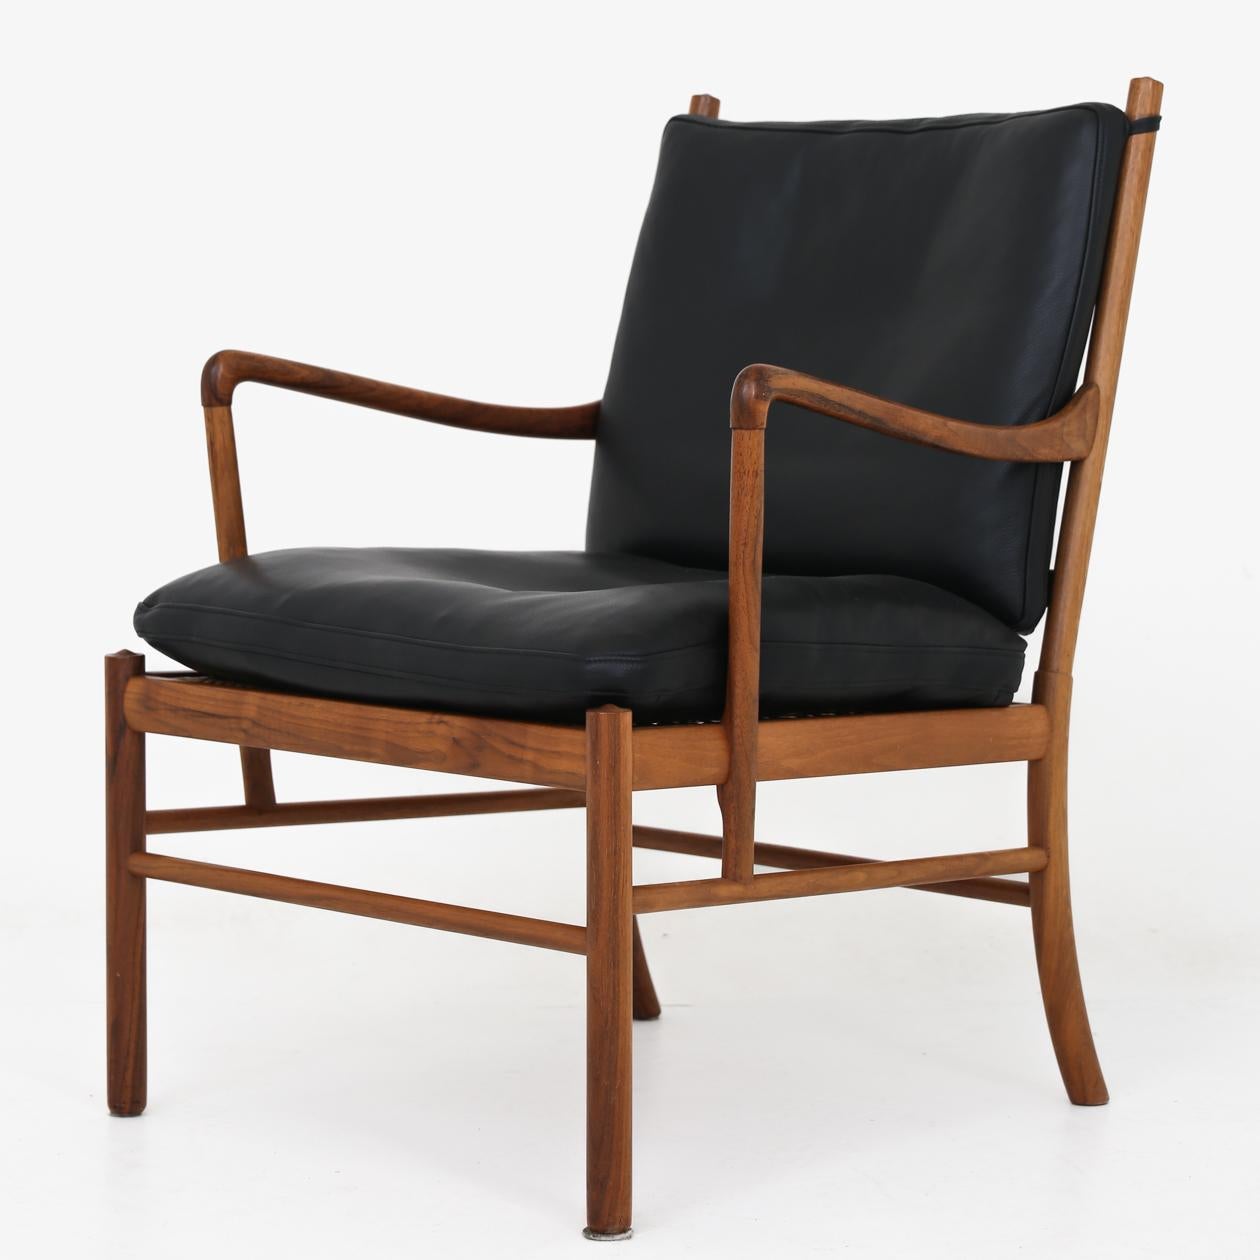 Colonial chair with matching footstool in walnut and black leather. By Ole Wanscher / P.J Furniture